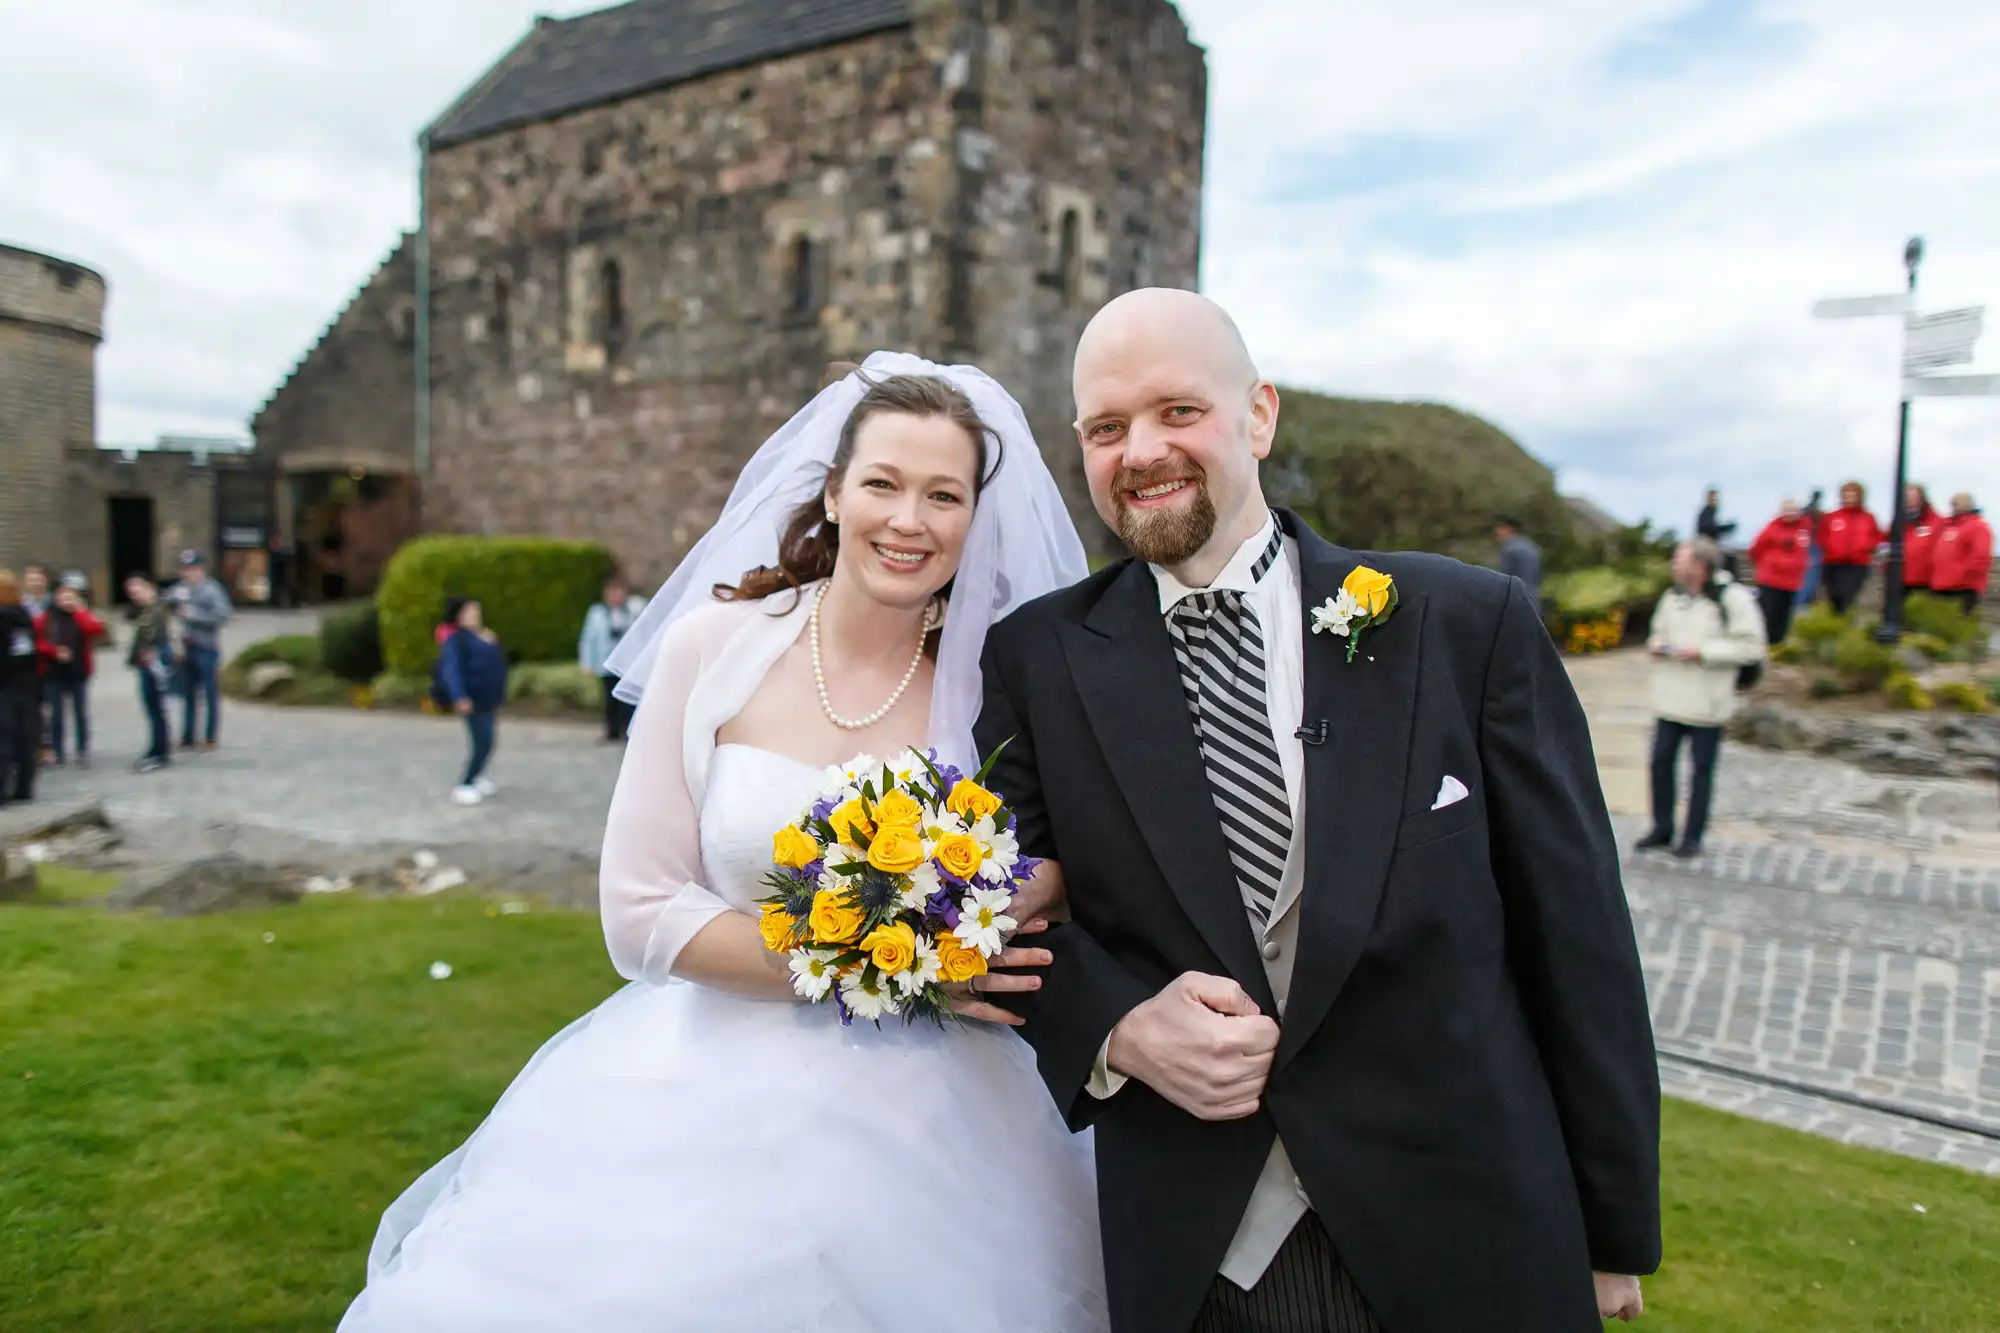 A bride and groom smiling, holding hands in front of an old stone church, the bride holding a bouquet of yellow flowers.